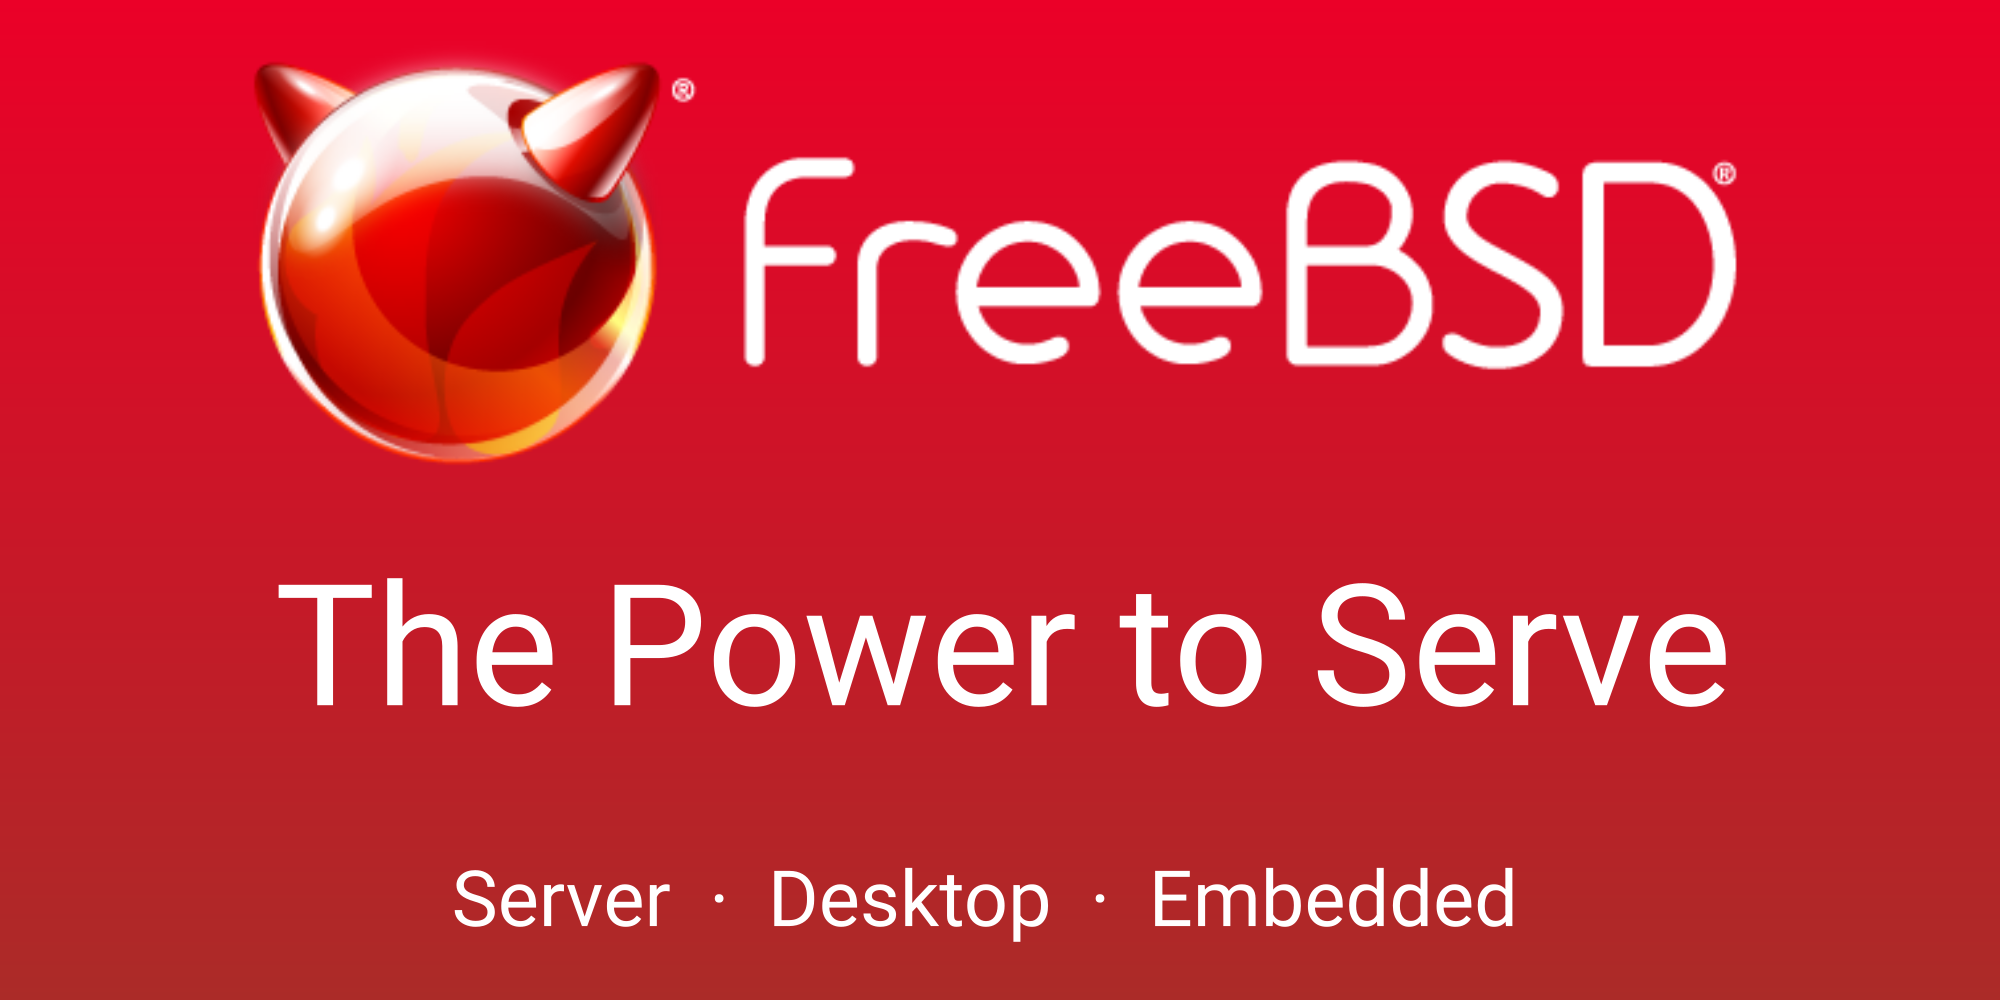 www.freebsd.org image